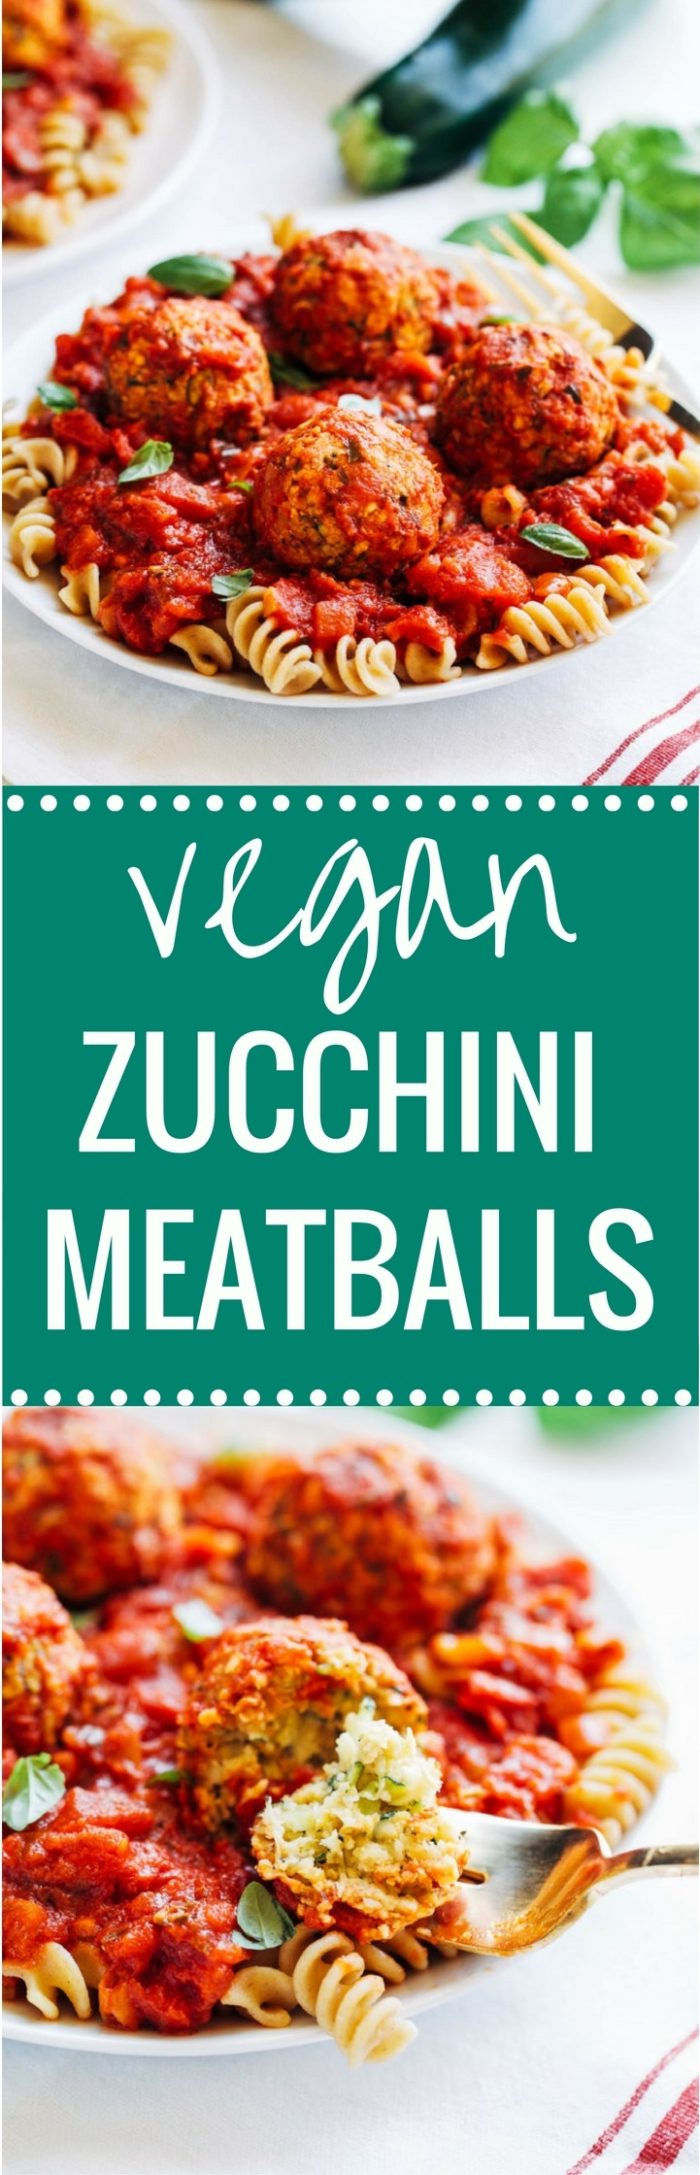 Vegan Zucchini 'Meatballs' - less than 10 ingredients and 20 minutes to make! Each serving offers 25 grams of plant-based protein! (vegan + gluten-free)